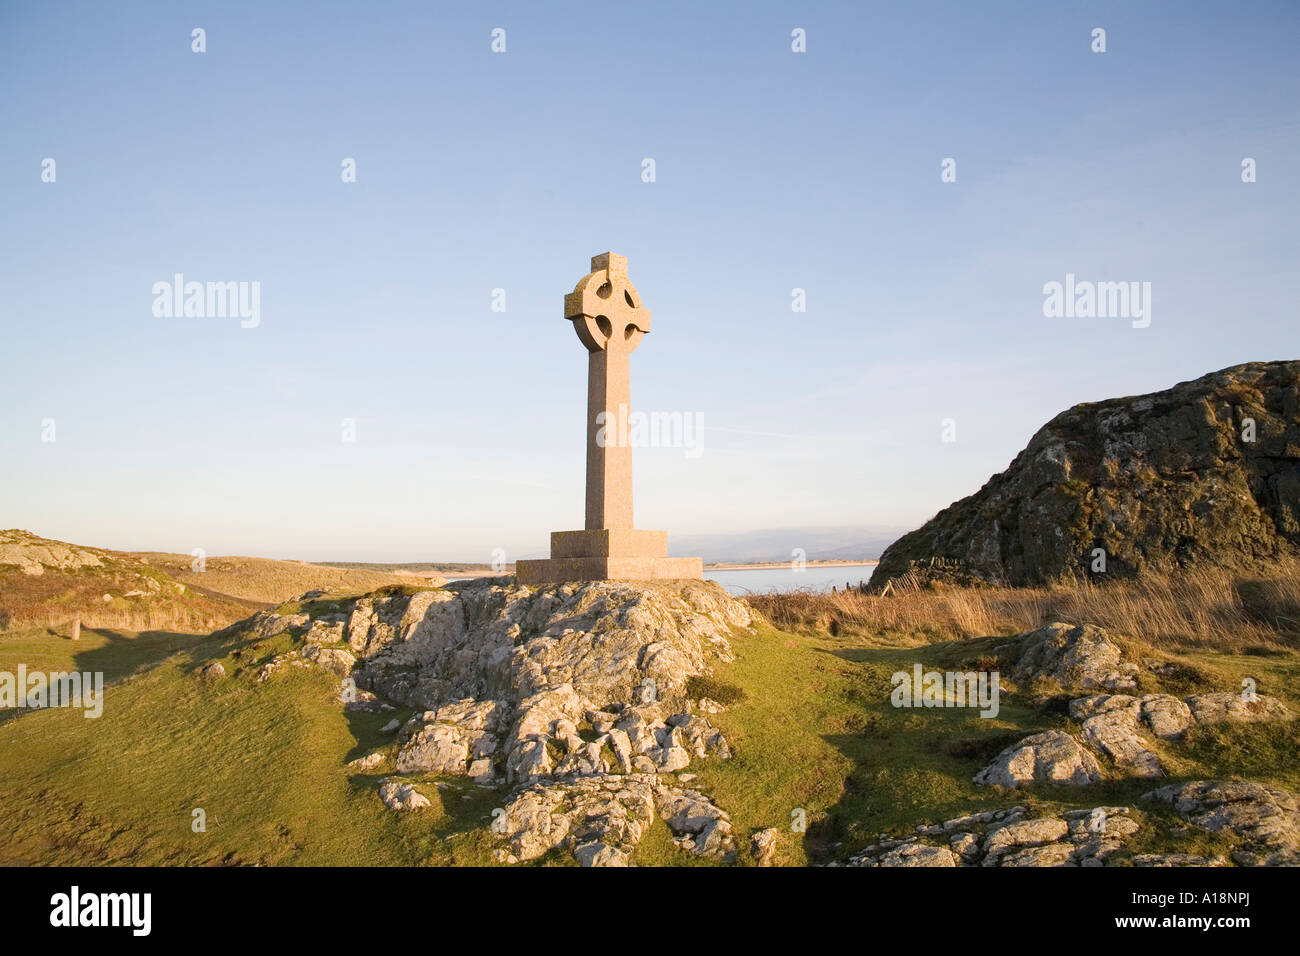 LLANDDWYN ISLAND ISLE OF ANGLESEY NORTH WALES December The late evening sun casts a warm glow on the Celtic Cross Stock Photo